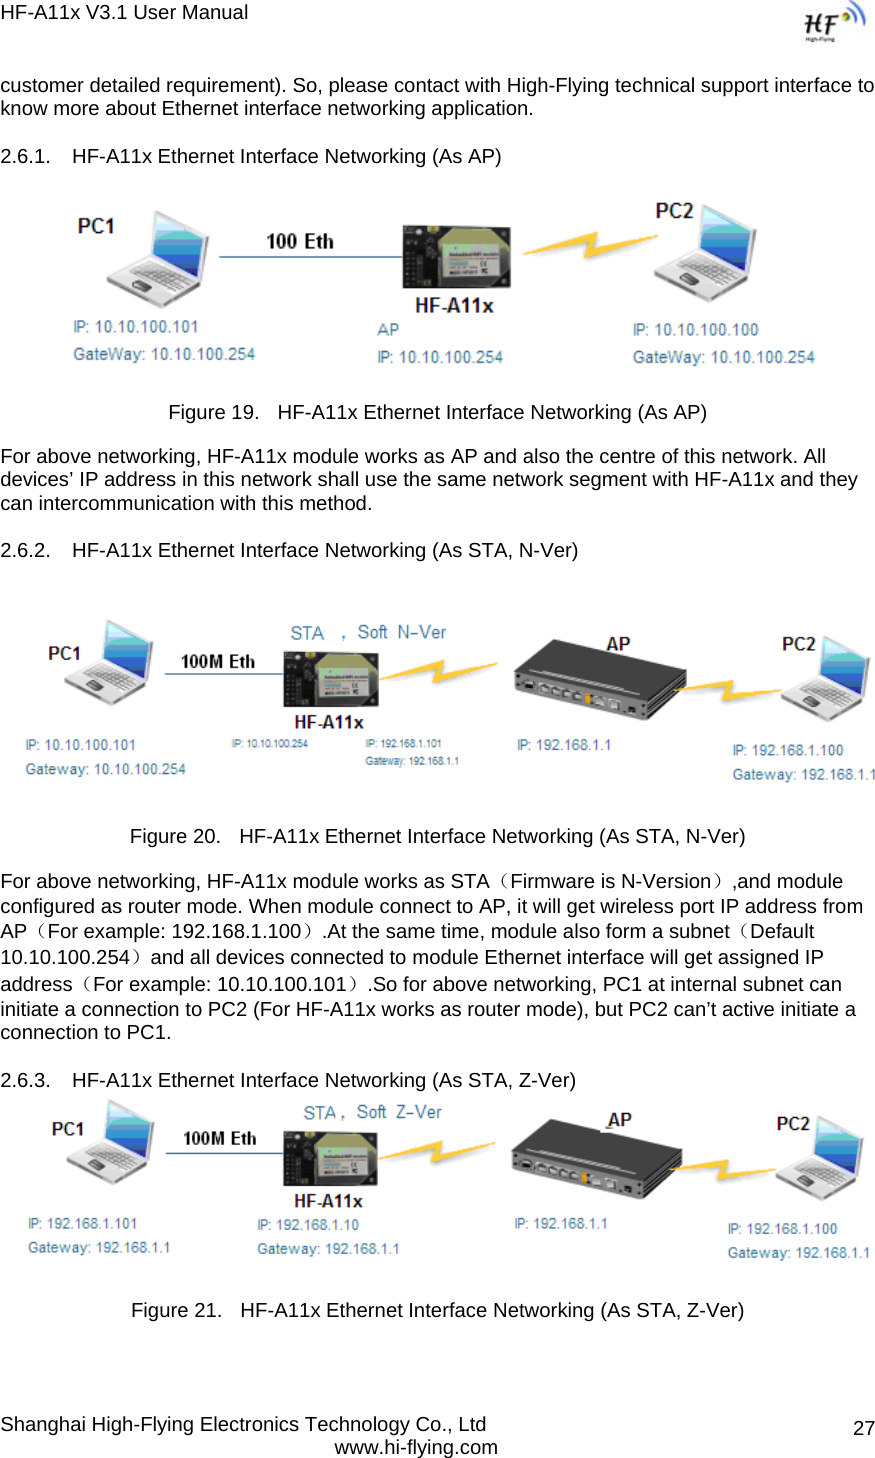 HF-A11x V3.1 User Manual Shanghai High-Flying Electronics Technology Co., Ltd www.hi-flying.com  27customer detailed requirement). So, please contact with High-Flying technical support interface to know more about Ethernet interface networking application. 2.6.1.  HF-A11x Ethernet Interface Networking (As AP)   Figure 19.  HF-A11x Ethernet Interface Networking (As AP) For above networking, HF-A11x module works as AP and also the centre of this network. All devices’ IP address in this network shall use the same network segment with HF-A11x and they can intercommunication with this method.  2.6.2.  HF-A11x Ethernet Interface Networking (As STA, N-Ver)    Figure 20.  HF-A11x Ethernet Interface Networking (As STA, N-Ver) For above networking, HF-A11x module works as STA（Firmware is N-Version）,and module configured as router mode. When module connect to AP, it will get wireless port IP address from AP（For example: 192.168.1.100）.At the same time, module also form a subnet（Default 10.10.100.254）and all devices connected to module Ethernet interface will get assigned IP address（For example: 10.10.100.101）.So for above networking, PC1 at internal subnet can initiate a connection to PC2 (For HF-A11x works as router mode), but PC2 can’t active initiate a connection to PC1. 2.6.3.  HF-A11x Ethernet Interface Networking (As STA, Z-Ver)  Figure 21.  HF-A11x Ethernet Interface Networking (As STA, Z-Ver) 